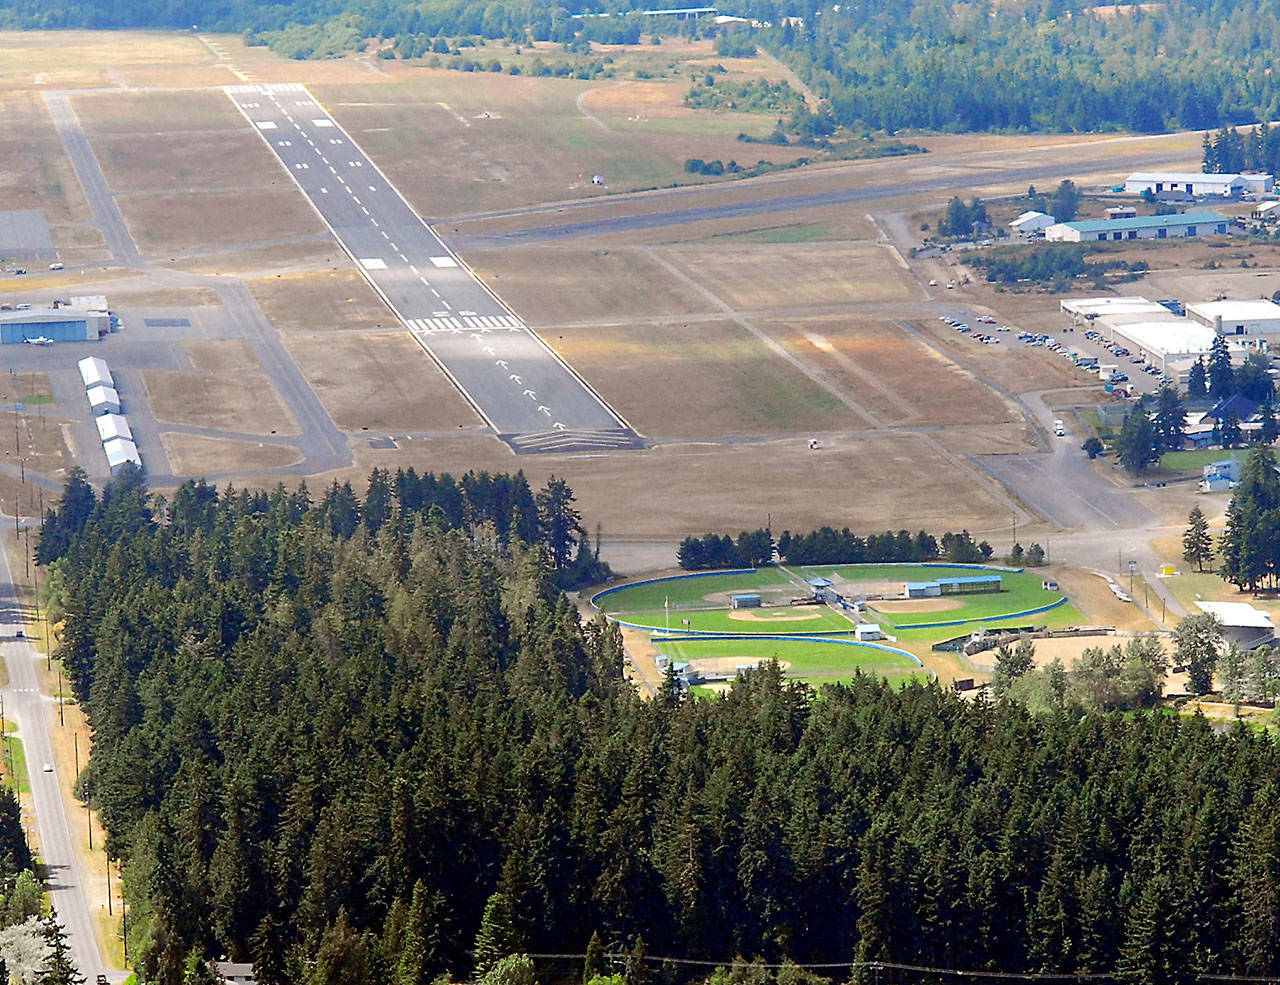 The 6,347-foot long main runway at William R. Fairchild International Airport in Port Angeles, known officially as 8/26, is shown in this July 2011 file photo. The heavily-forested Lincoln Park with its athletic fields is shown at bottom. (Keith Thorpe/Peninsula Daily News)